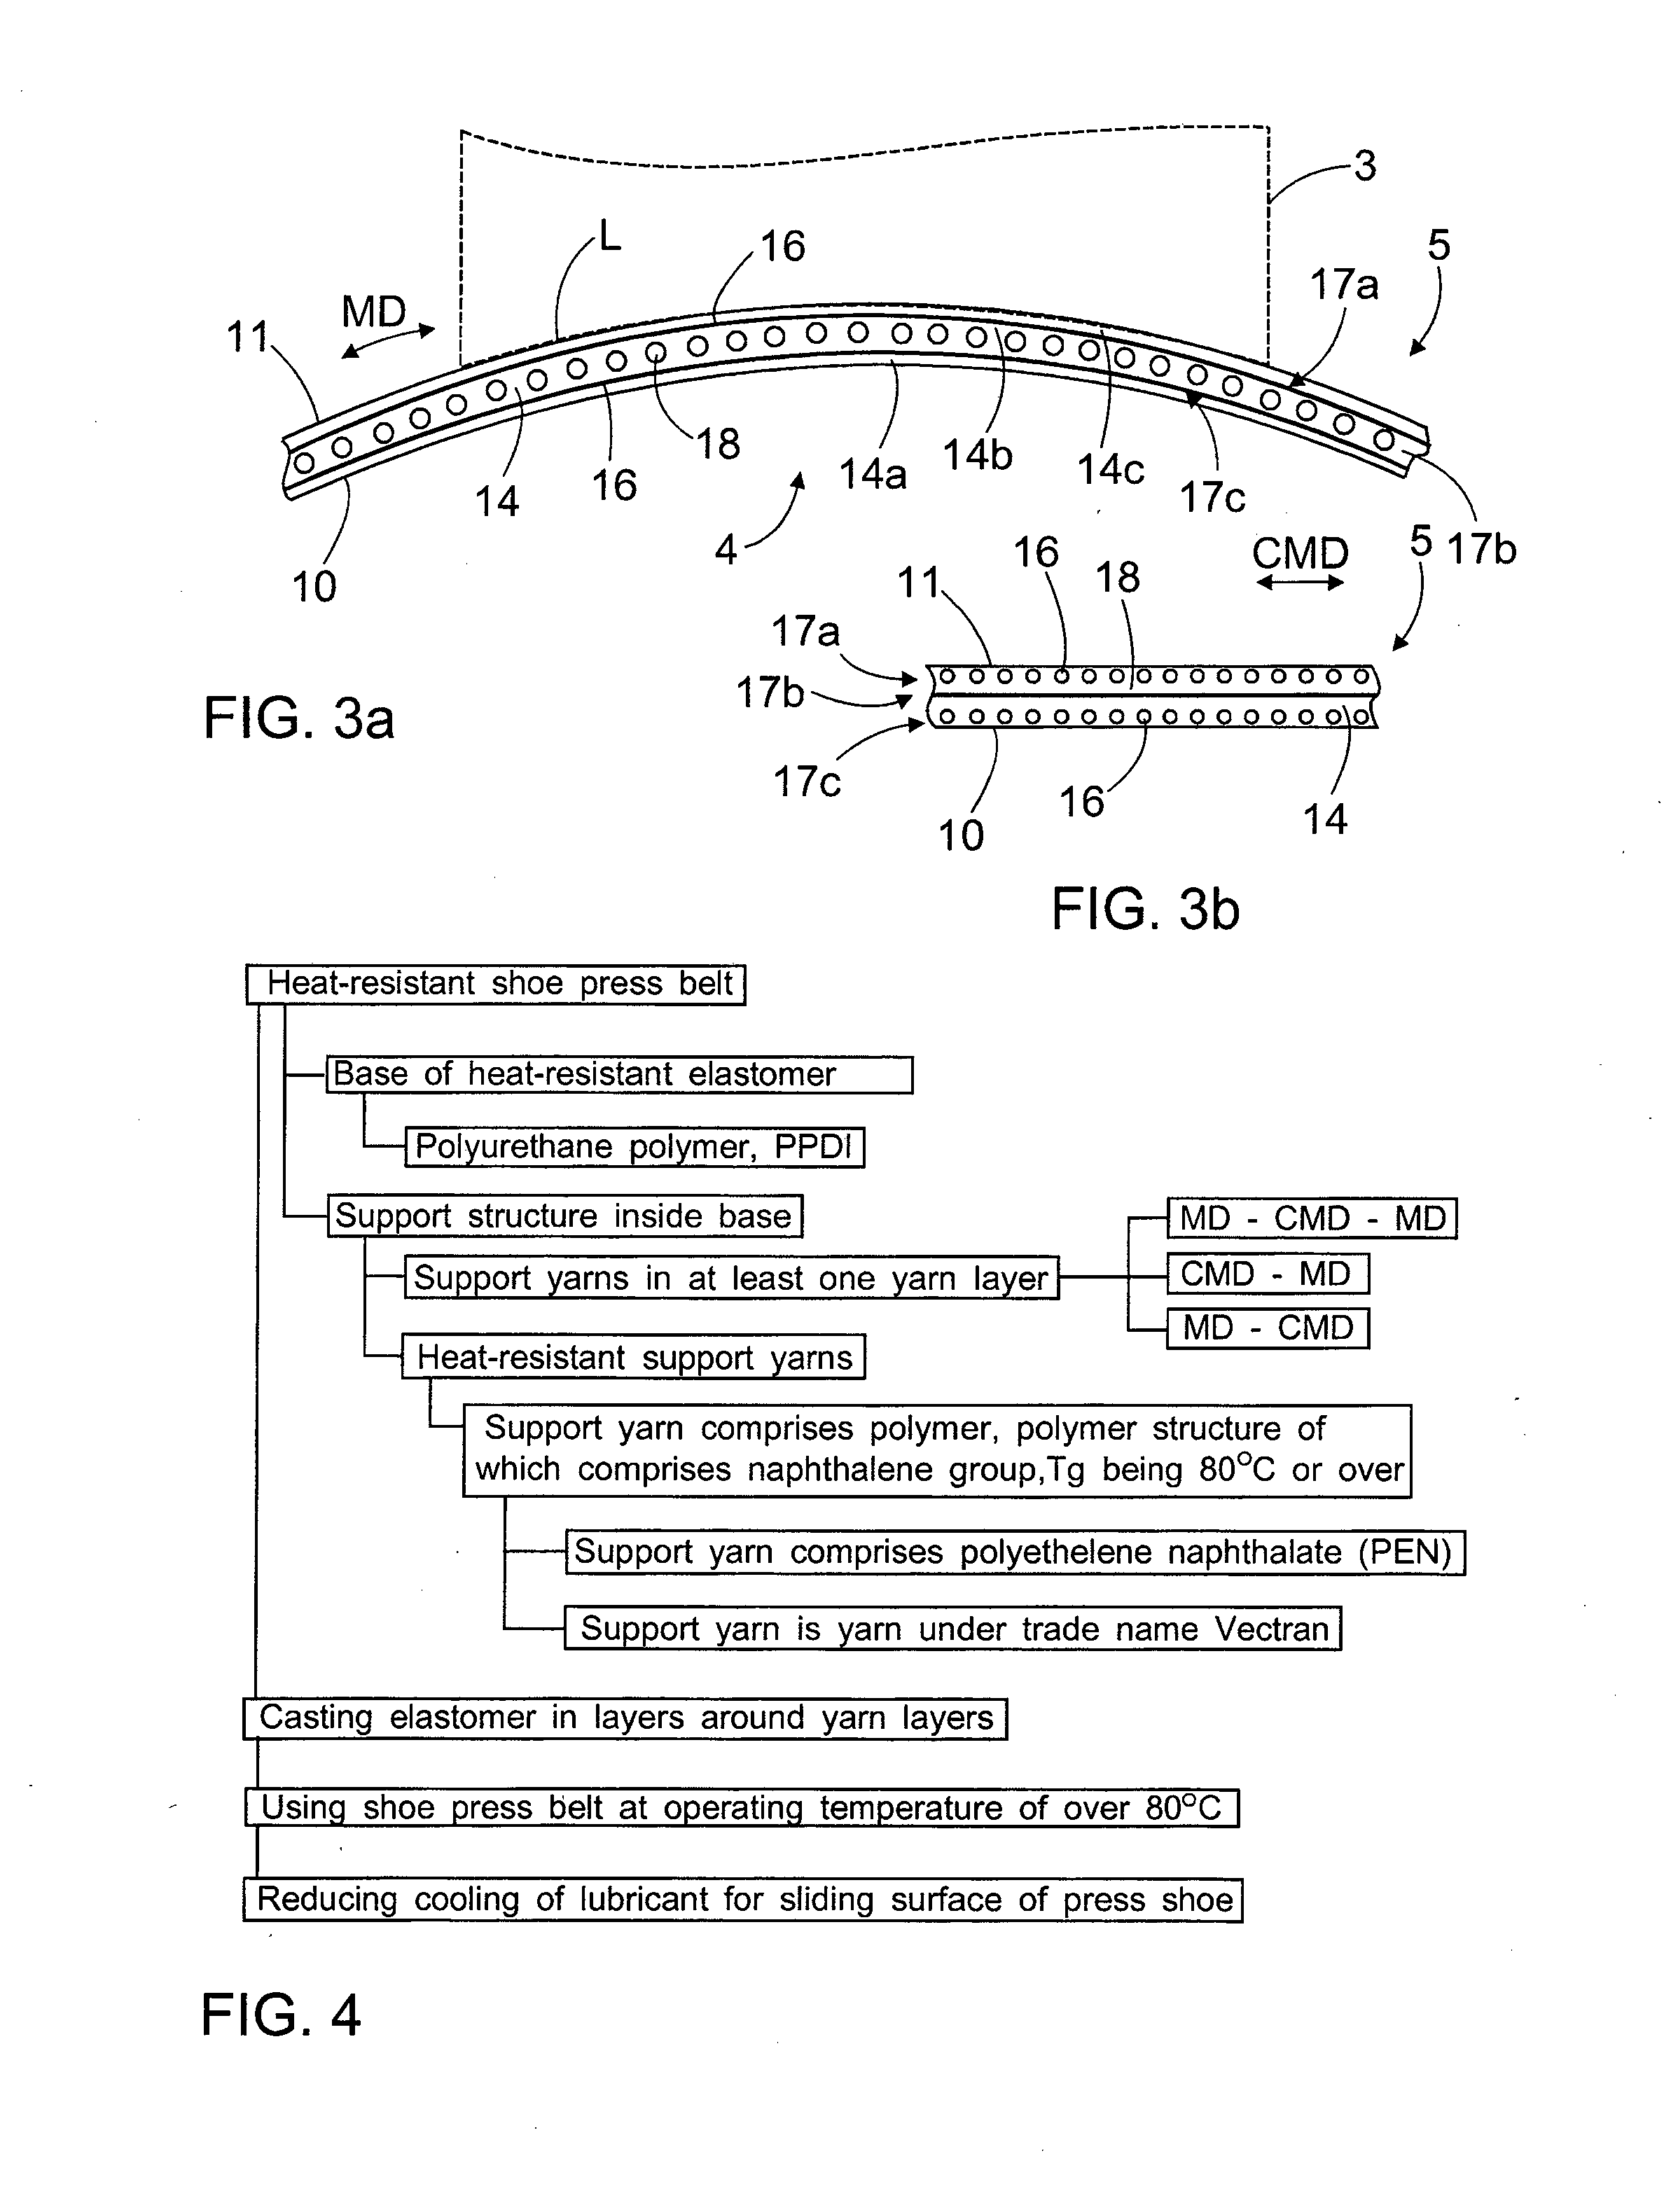 Shoe press belt, method for manufacturing the same, and use in shoe press